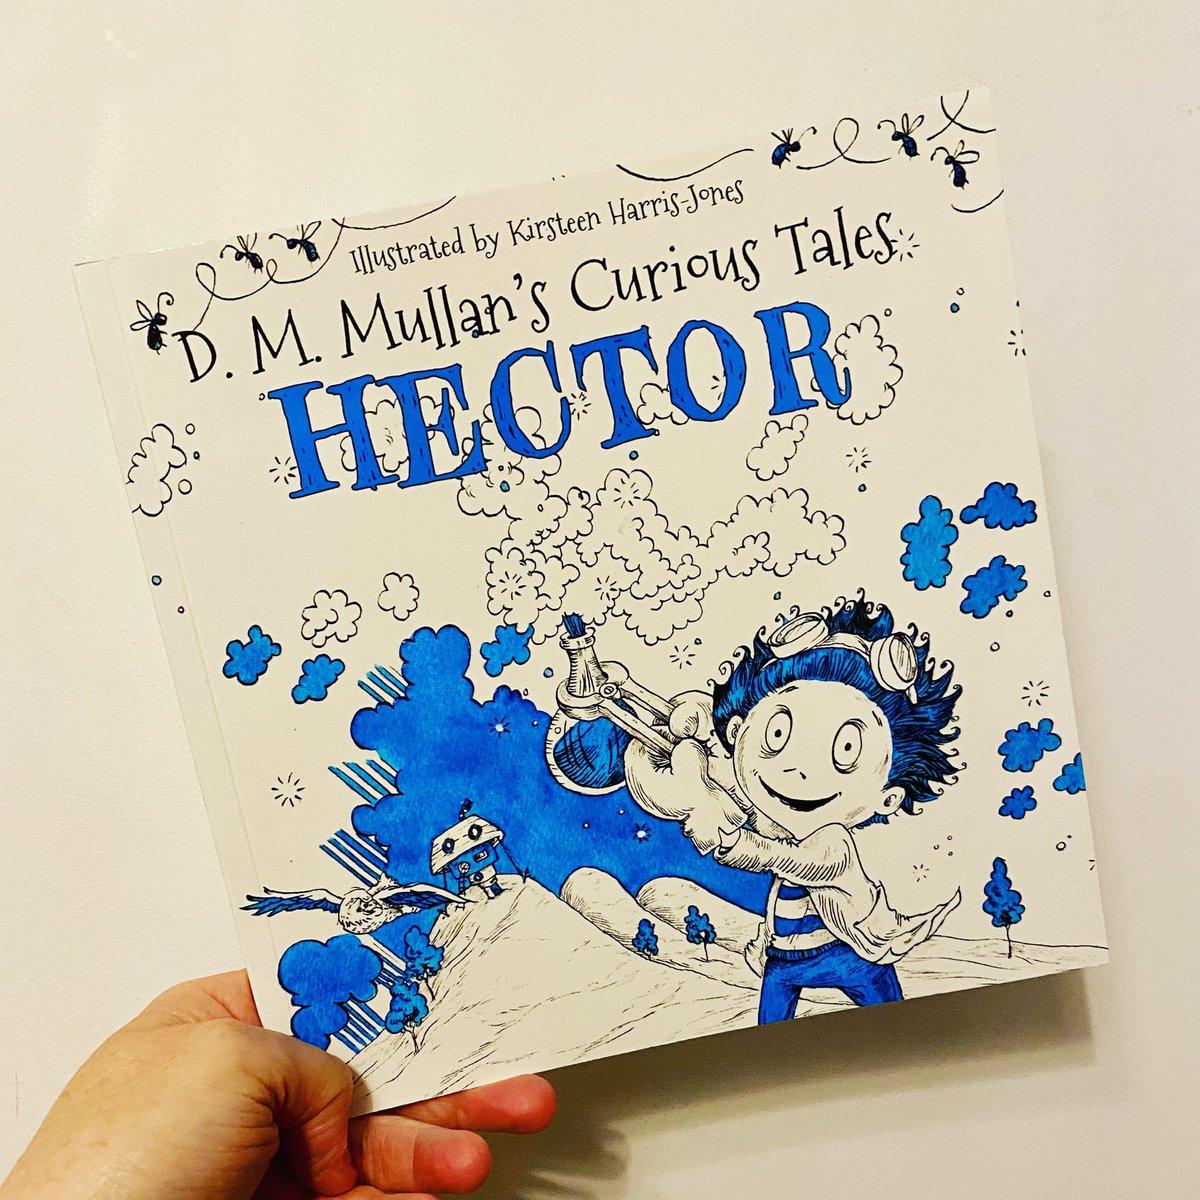 This is a fun little book about friendship and what it means to be a friend. It is very child friendly and easily accessible for the young reader.
Full review:instagram.com/p/CSP9A6dIgz4/… 
#Children_book_illustration #ChildrensBooks #childliteracy #bedtimestory #booksforkids #arcread